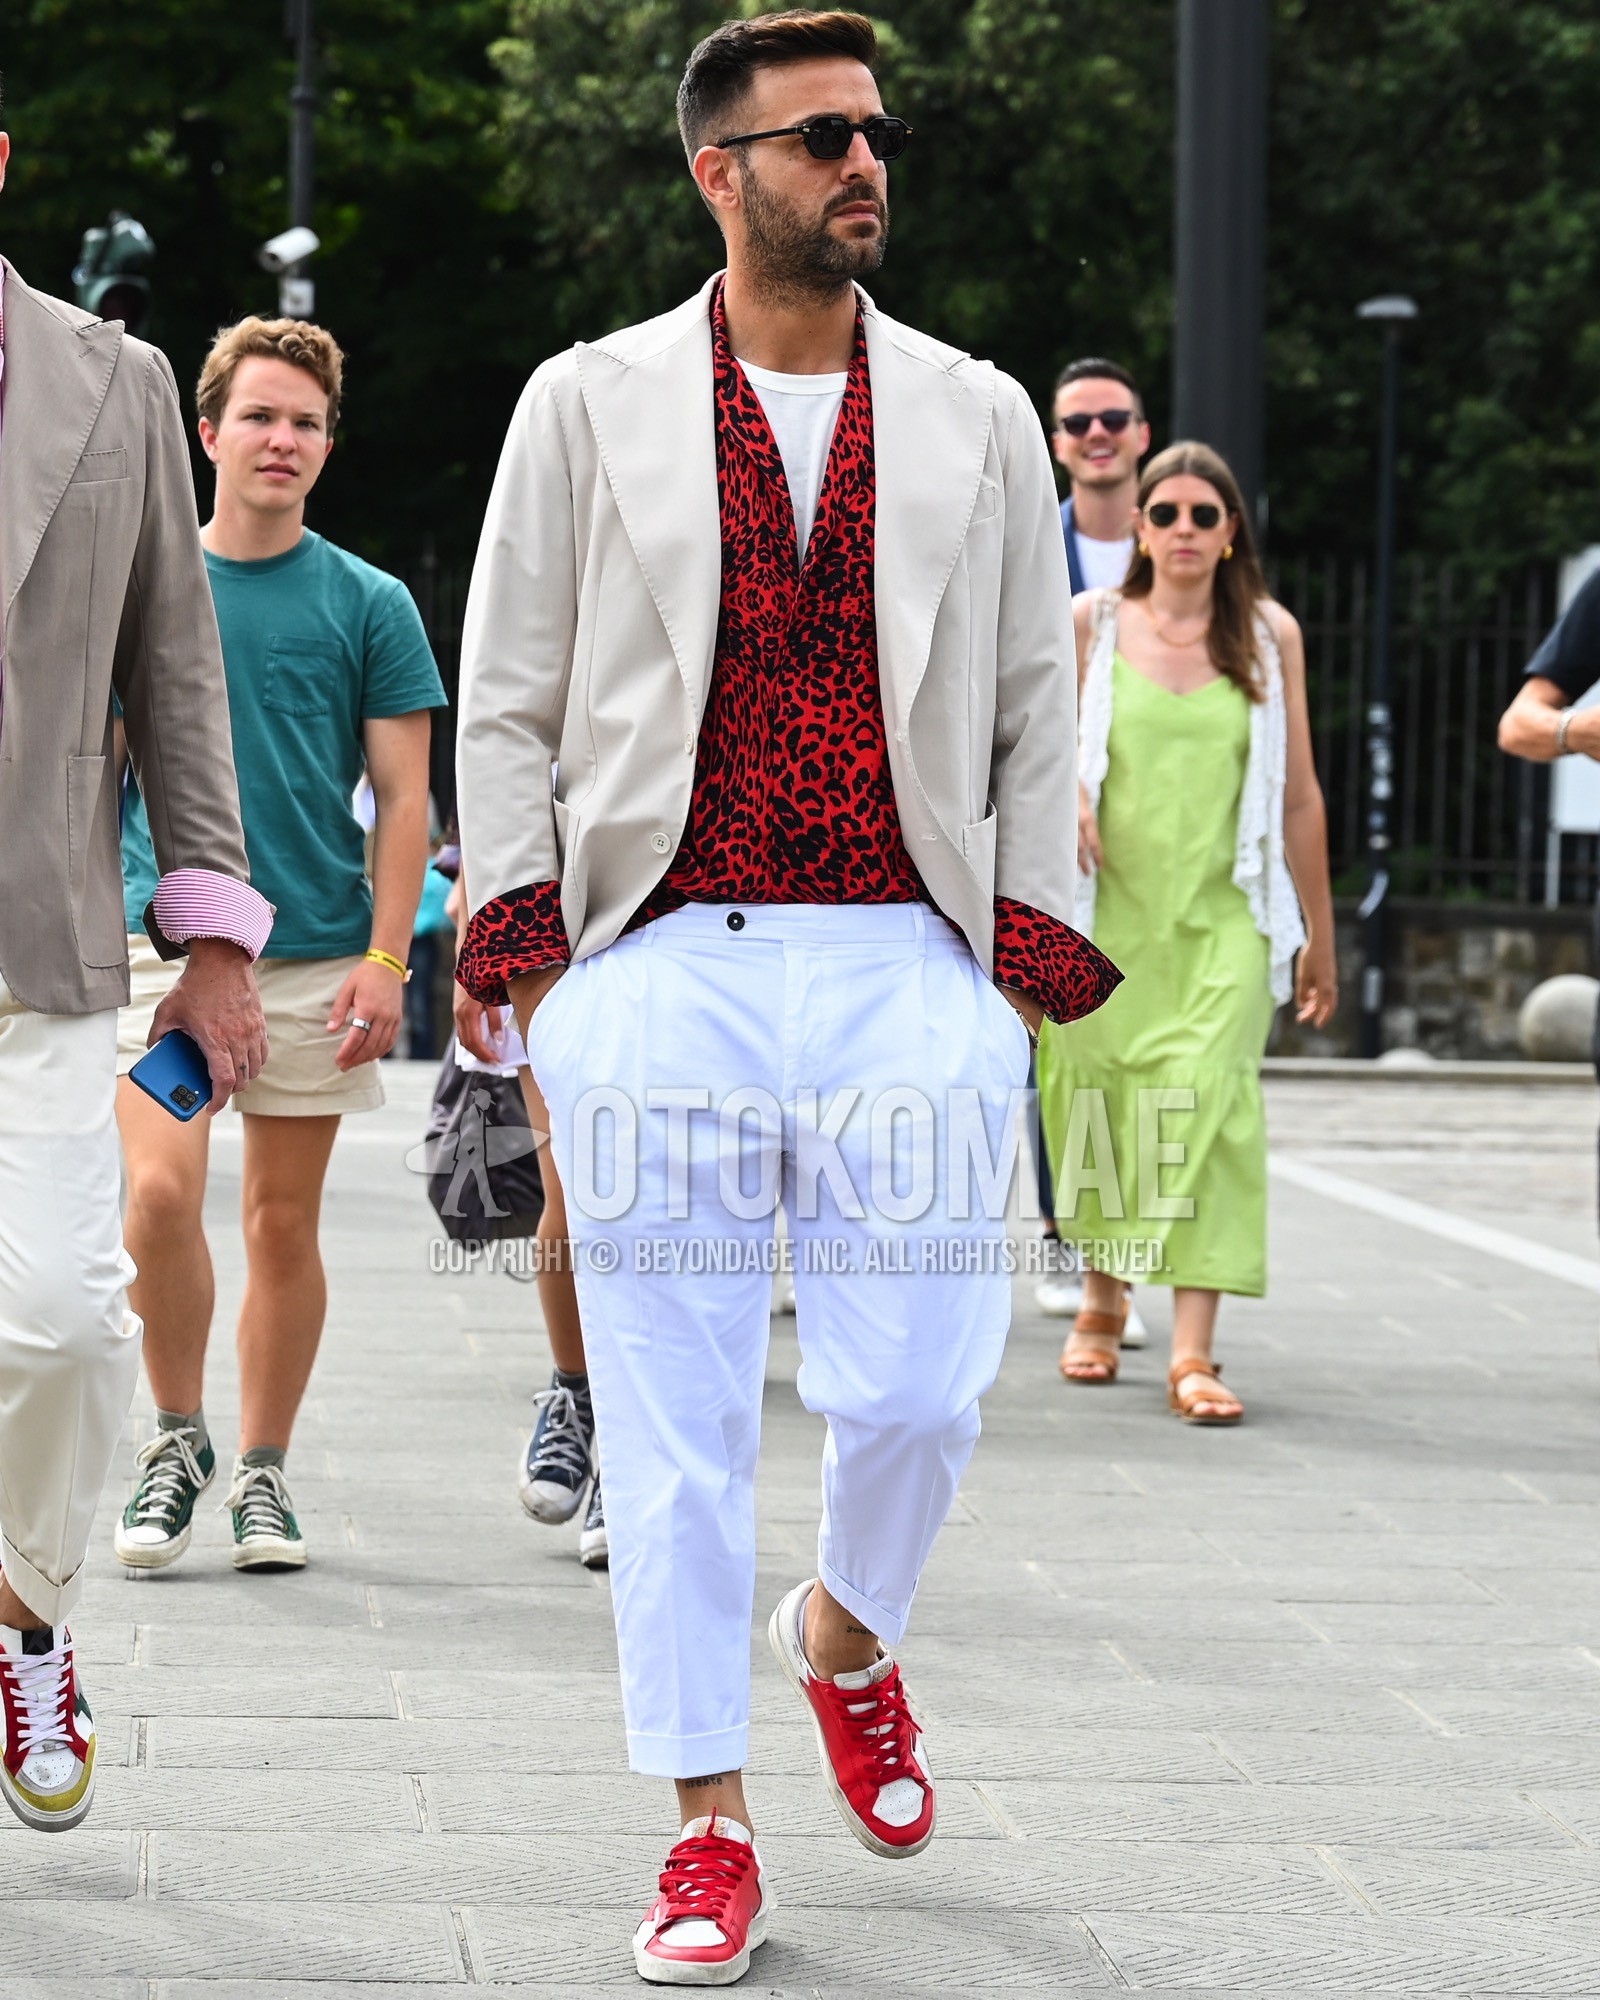 Men's spring summer autumn outfit with black plain sunglasses, white plain tailored jacket, red leopard shirt, white plain t-shirt, white plain beltless pants, red low-cut sneakers.